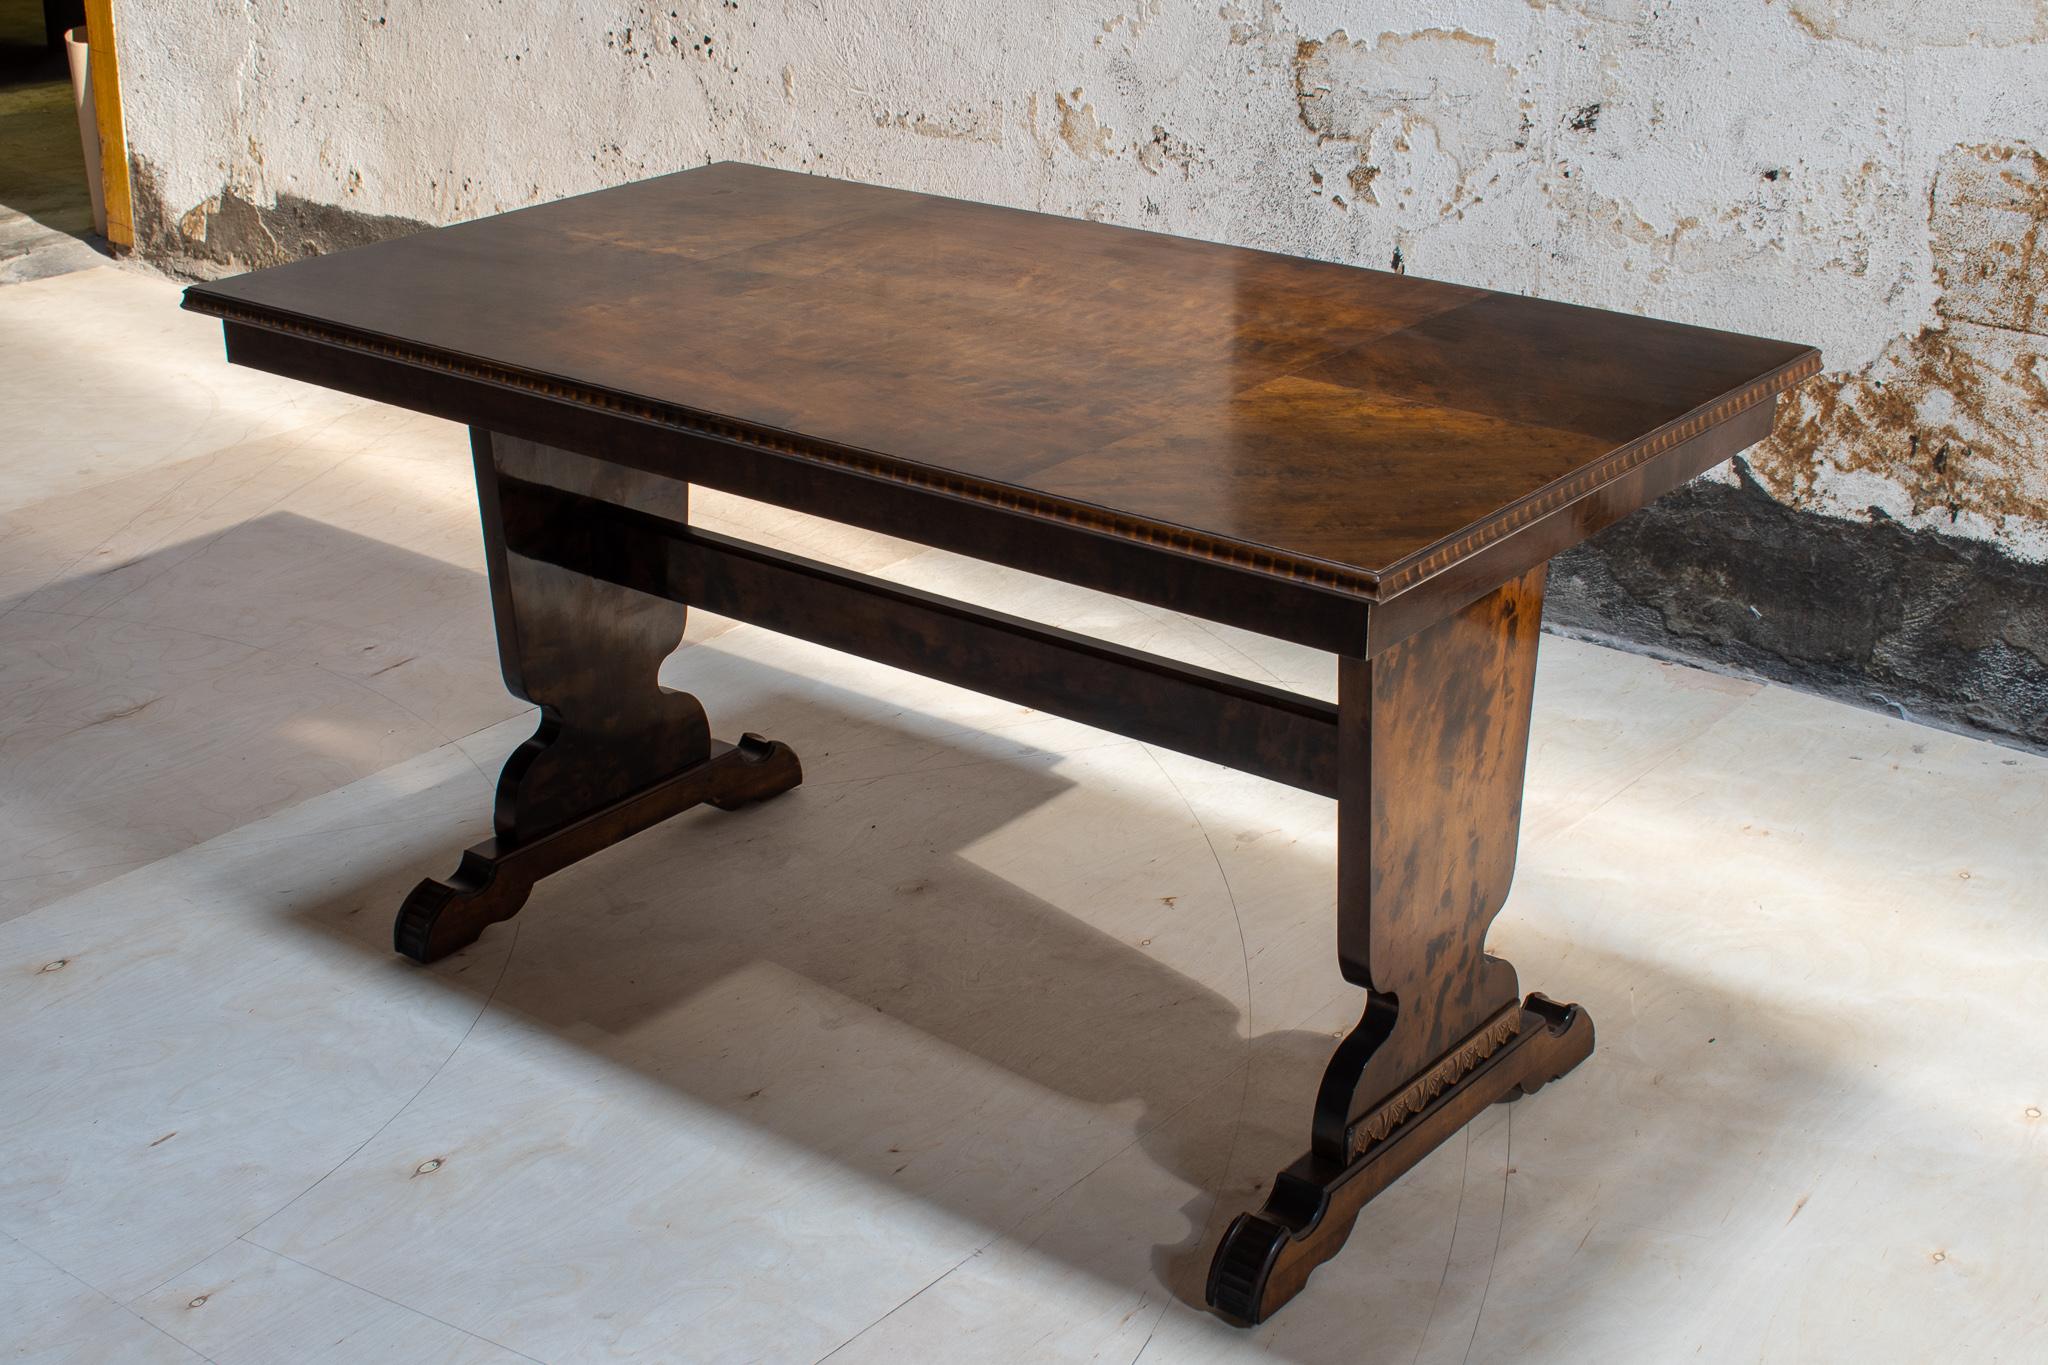 Swedish Art Deco trestle dining table made of dark flame birch with carved edge and feet. This style of trestle dining table is referred to as a 